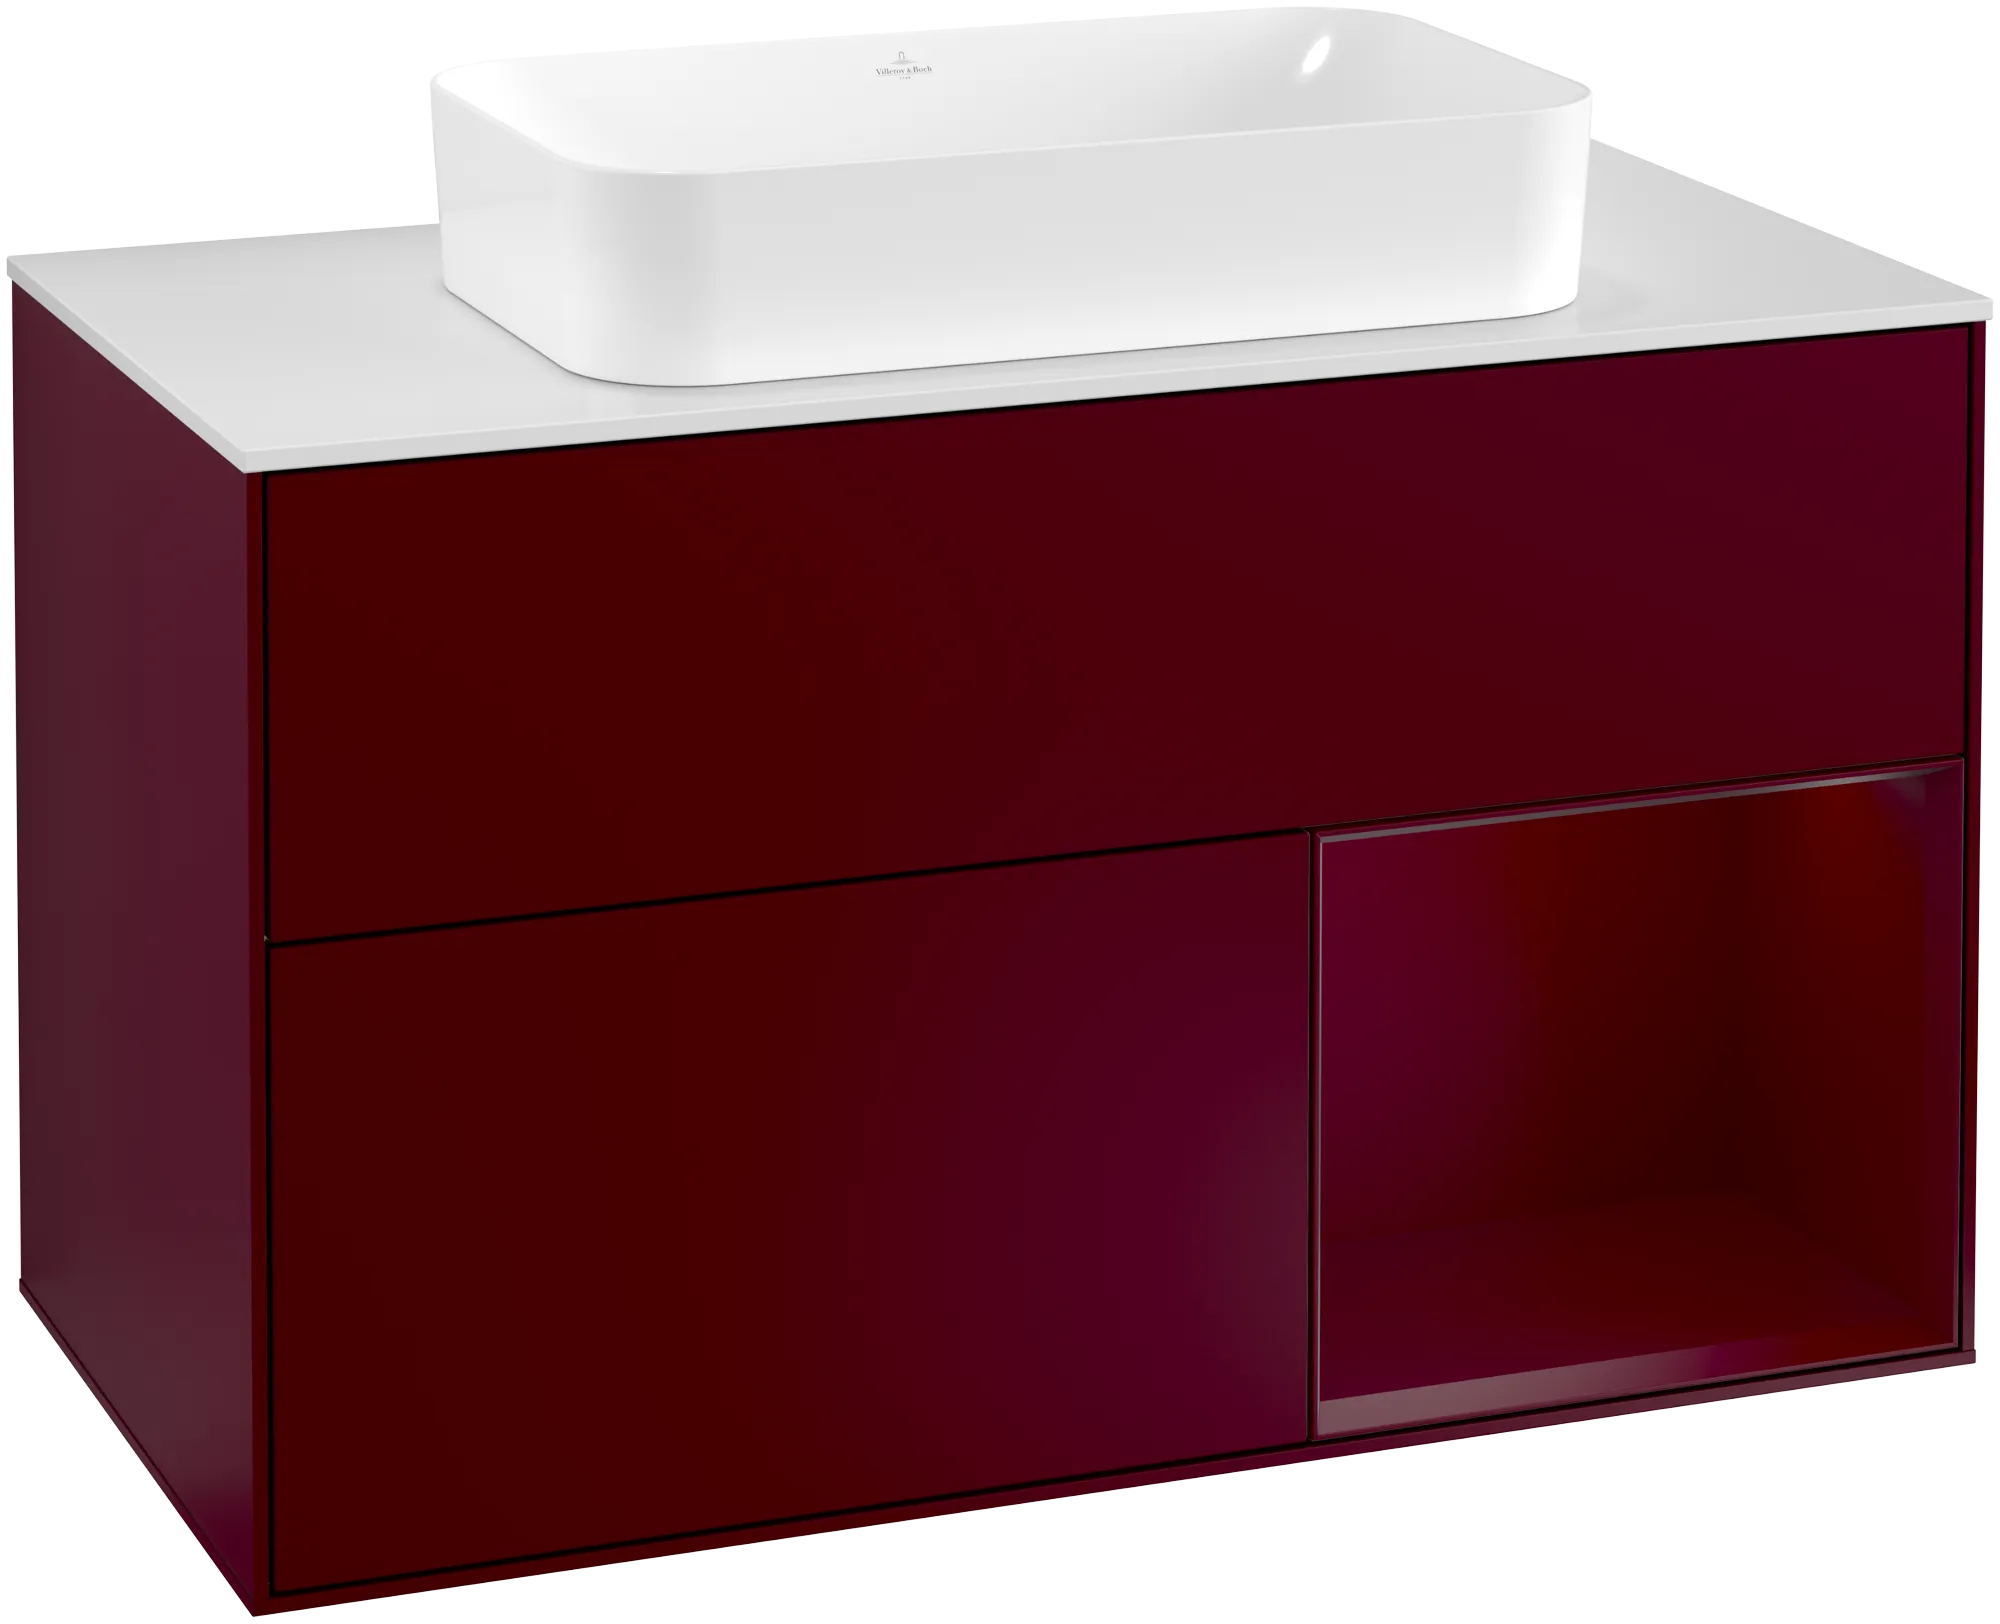 Picture of VILLEROY BOCH Finion Vanity unit, with lighting, 2 pull-out compartments, 1000 x 603 x 501 mm, Peony Matt Lacquer / Peony Matt Lacquer / Glass White Matt #G251HBHB